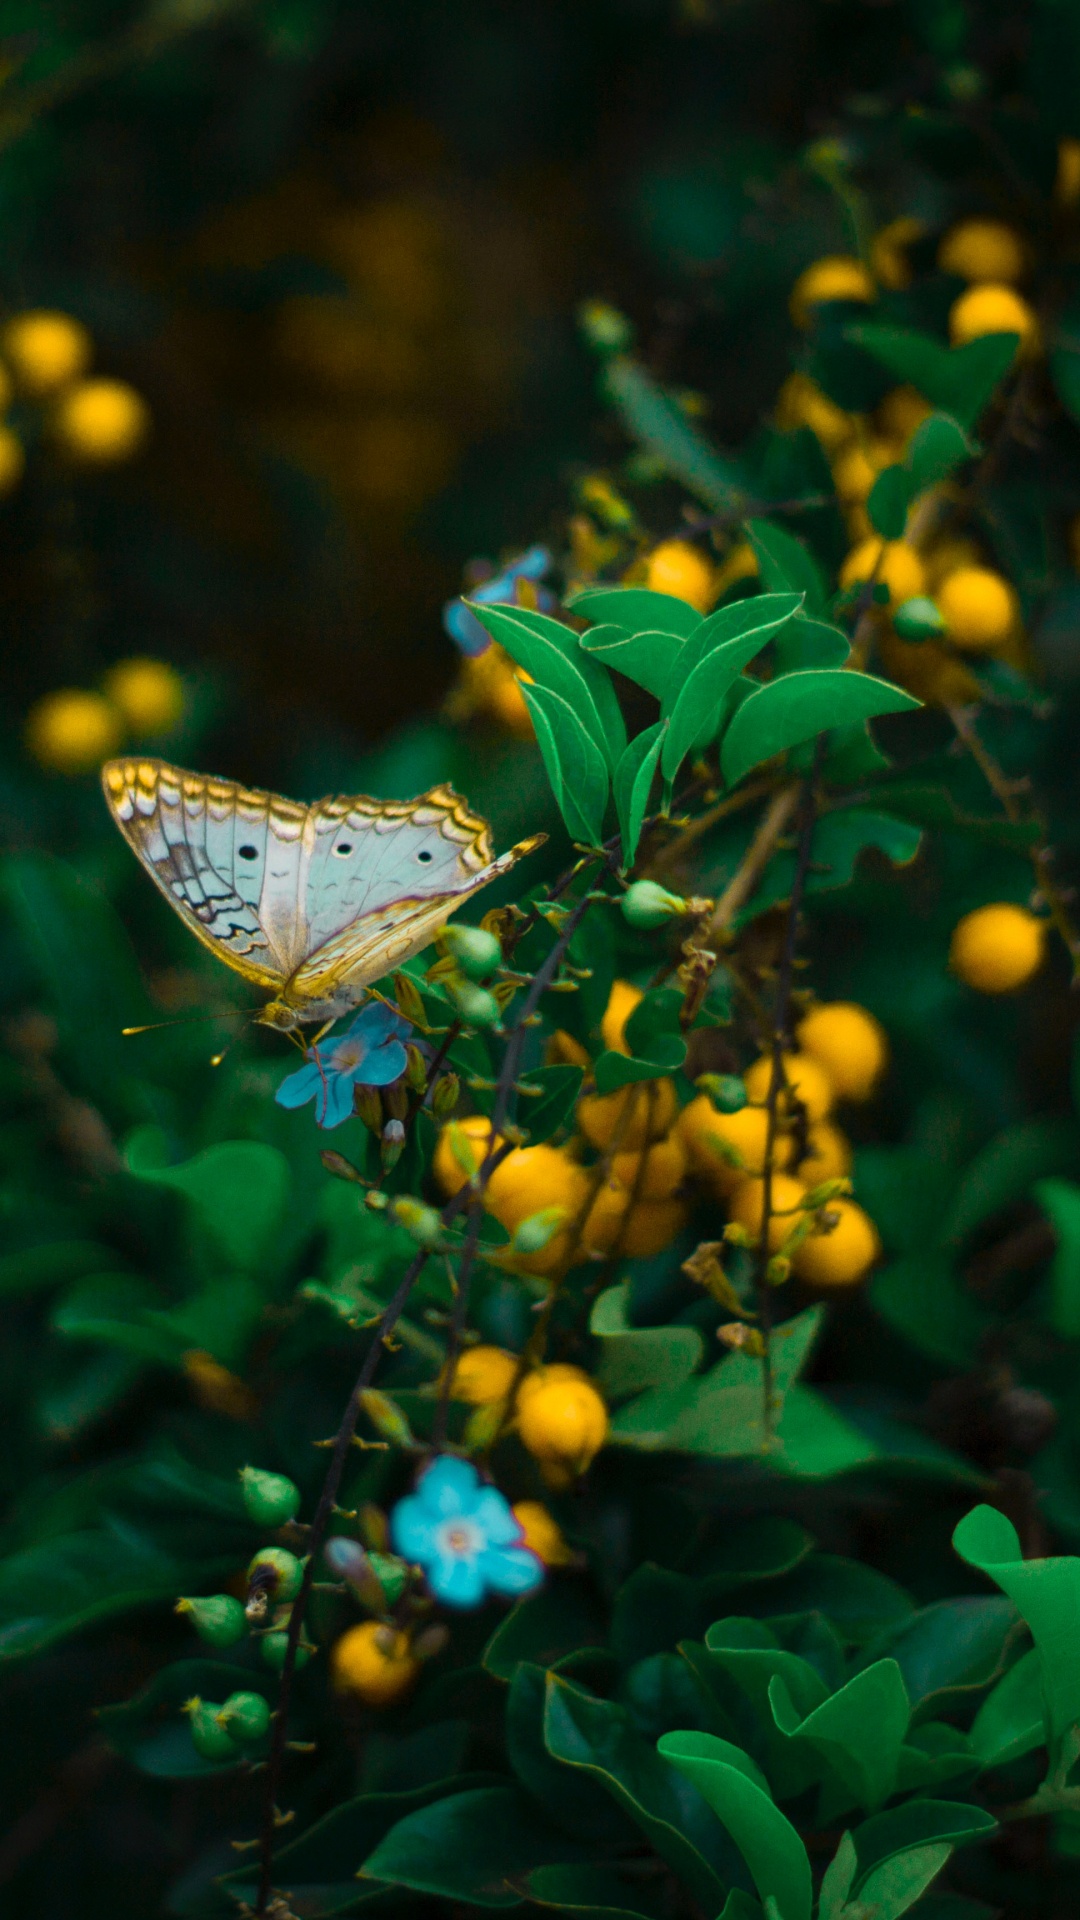 Cynthia Subgenus, Butterfly, Green, Insect, Leaf. Wallpaper in 1080x1920 Resolution